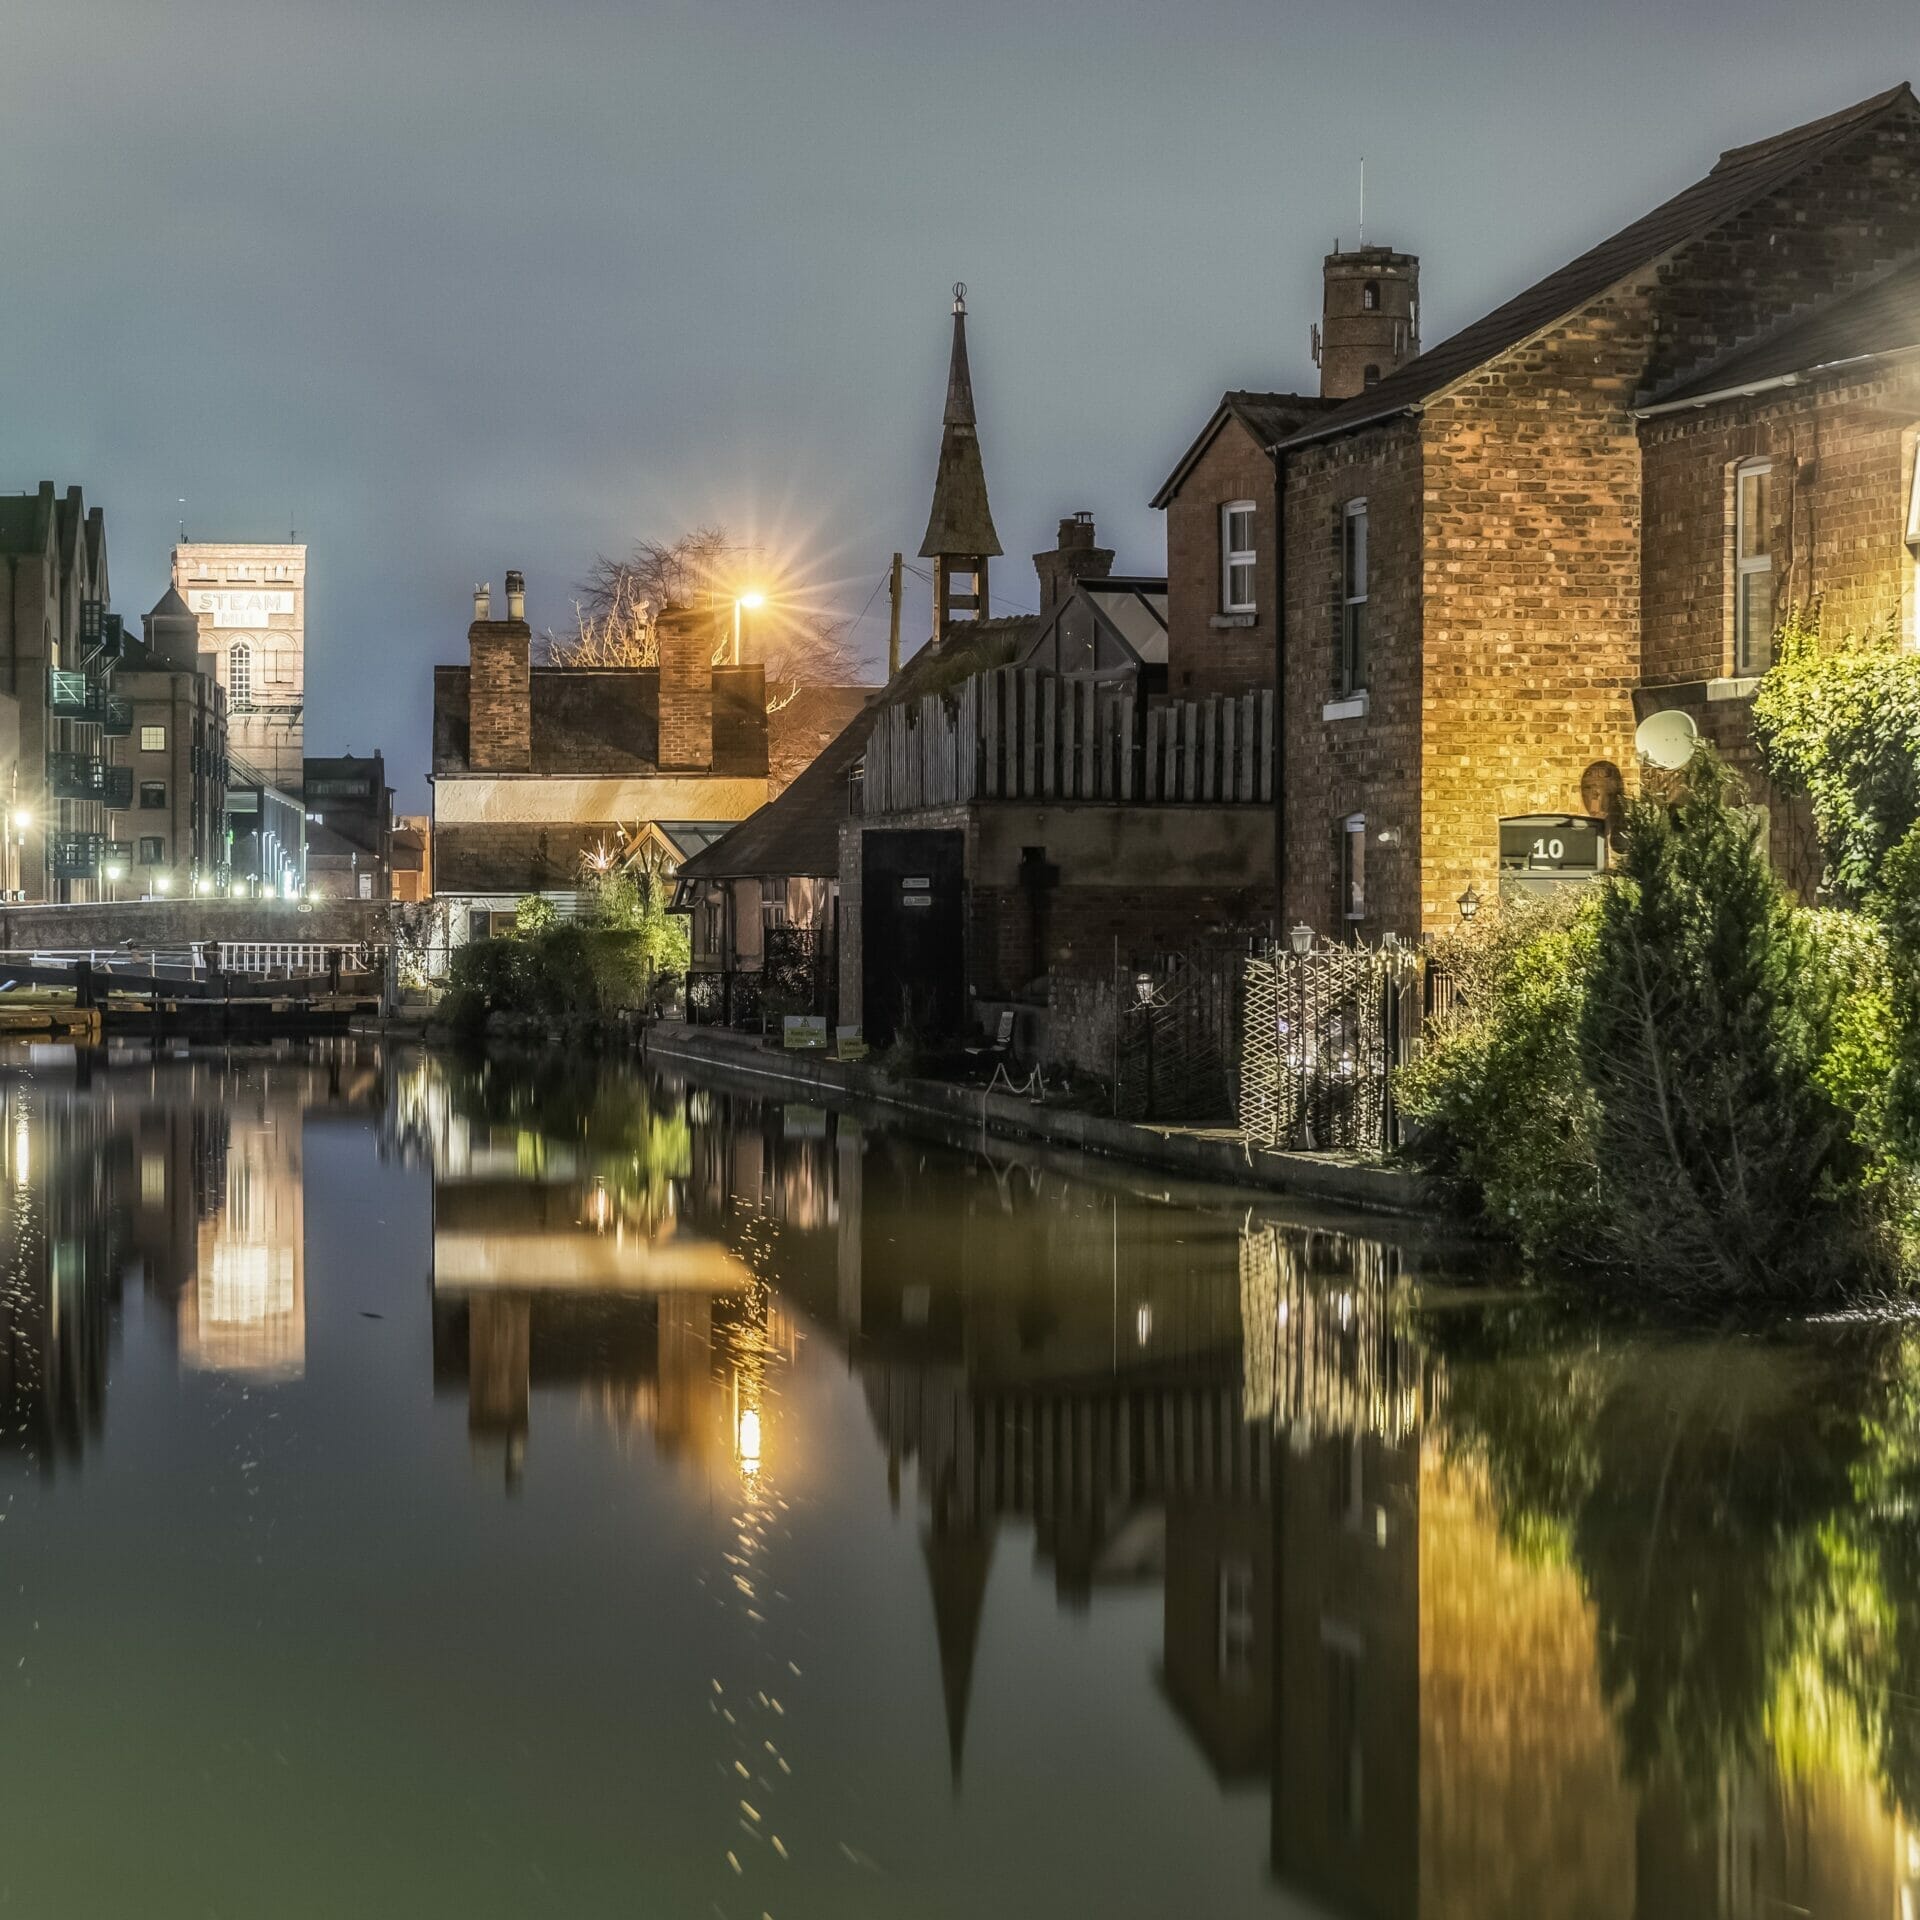 CAE - SEPT 2021 - Low-Light & HDR - Shropshire Canal - Mark Carline #5